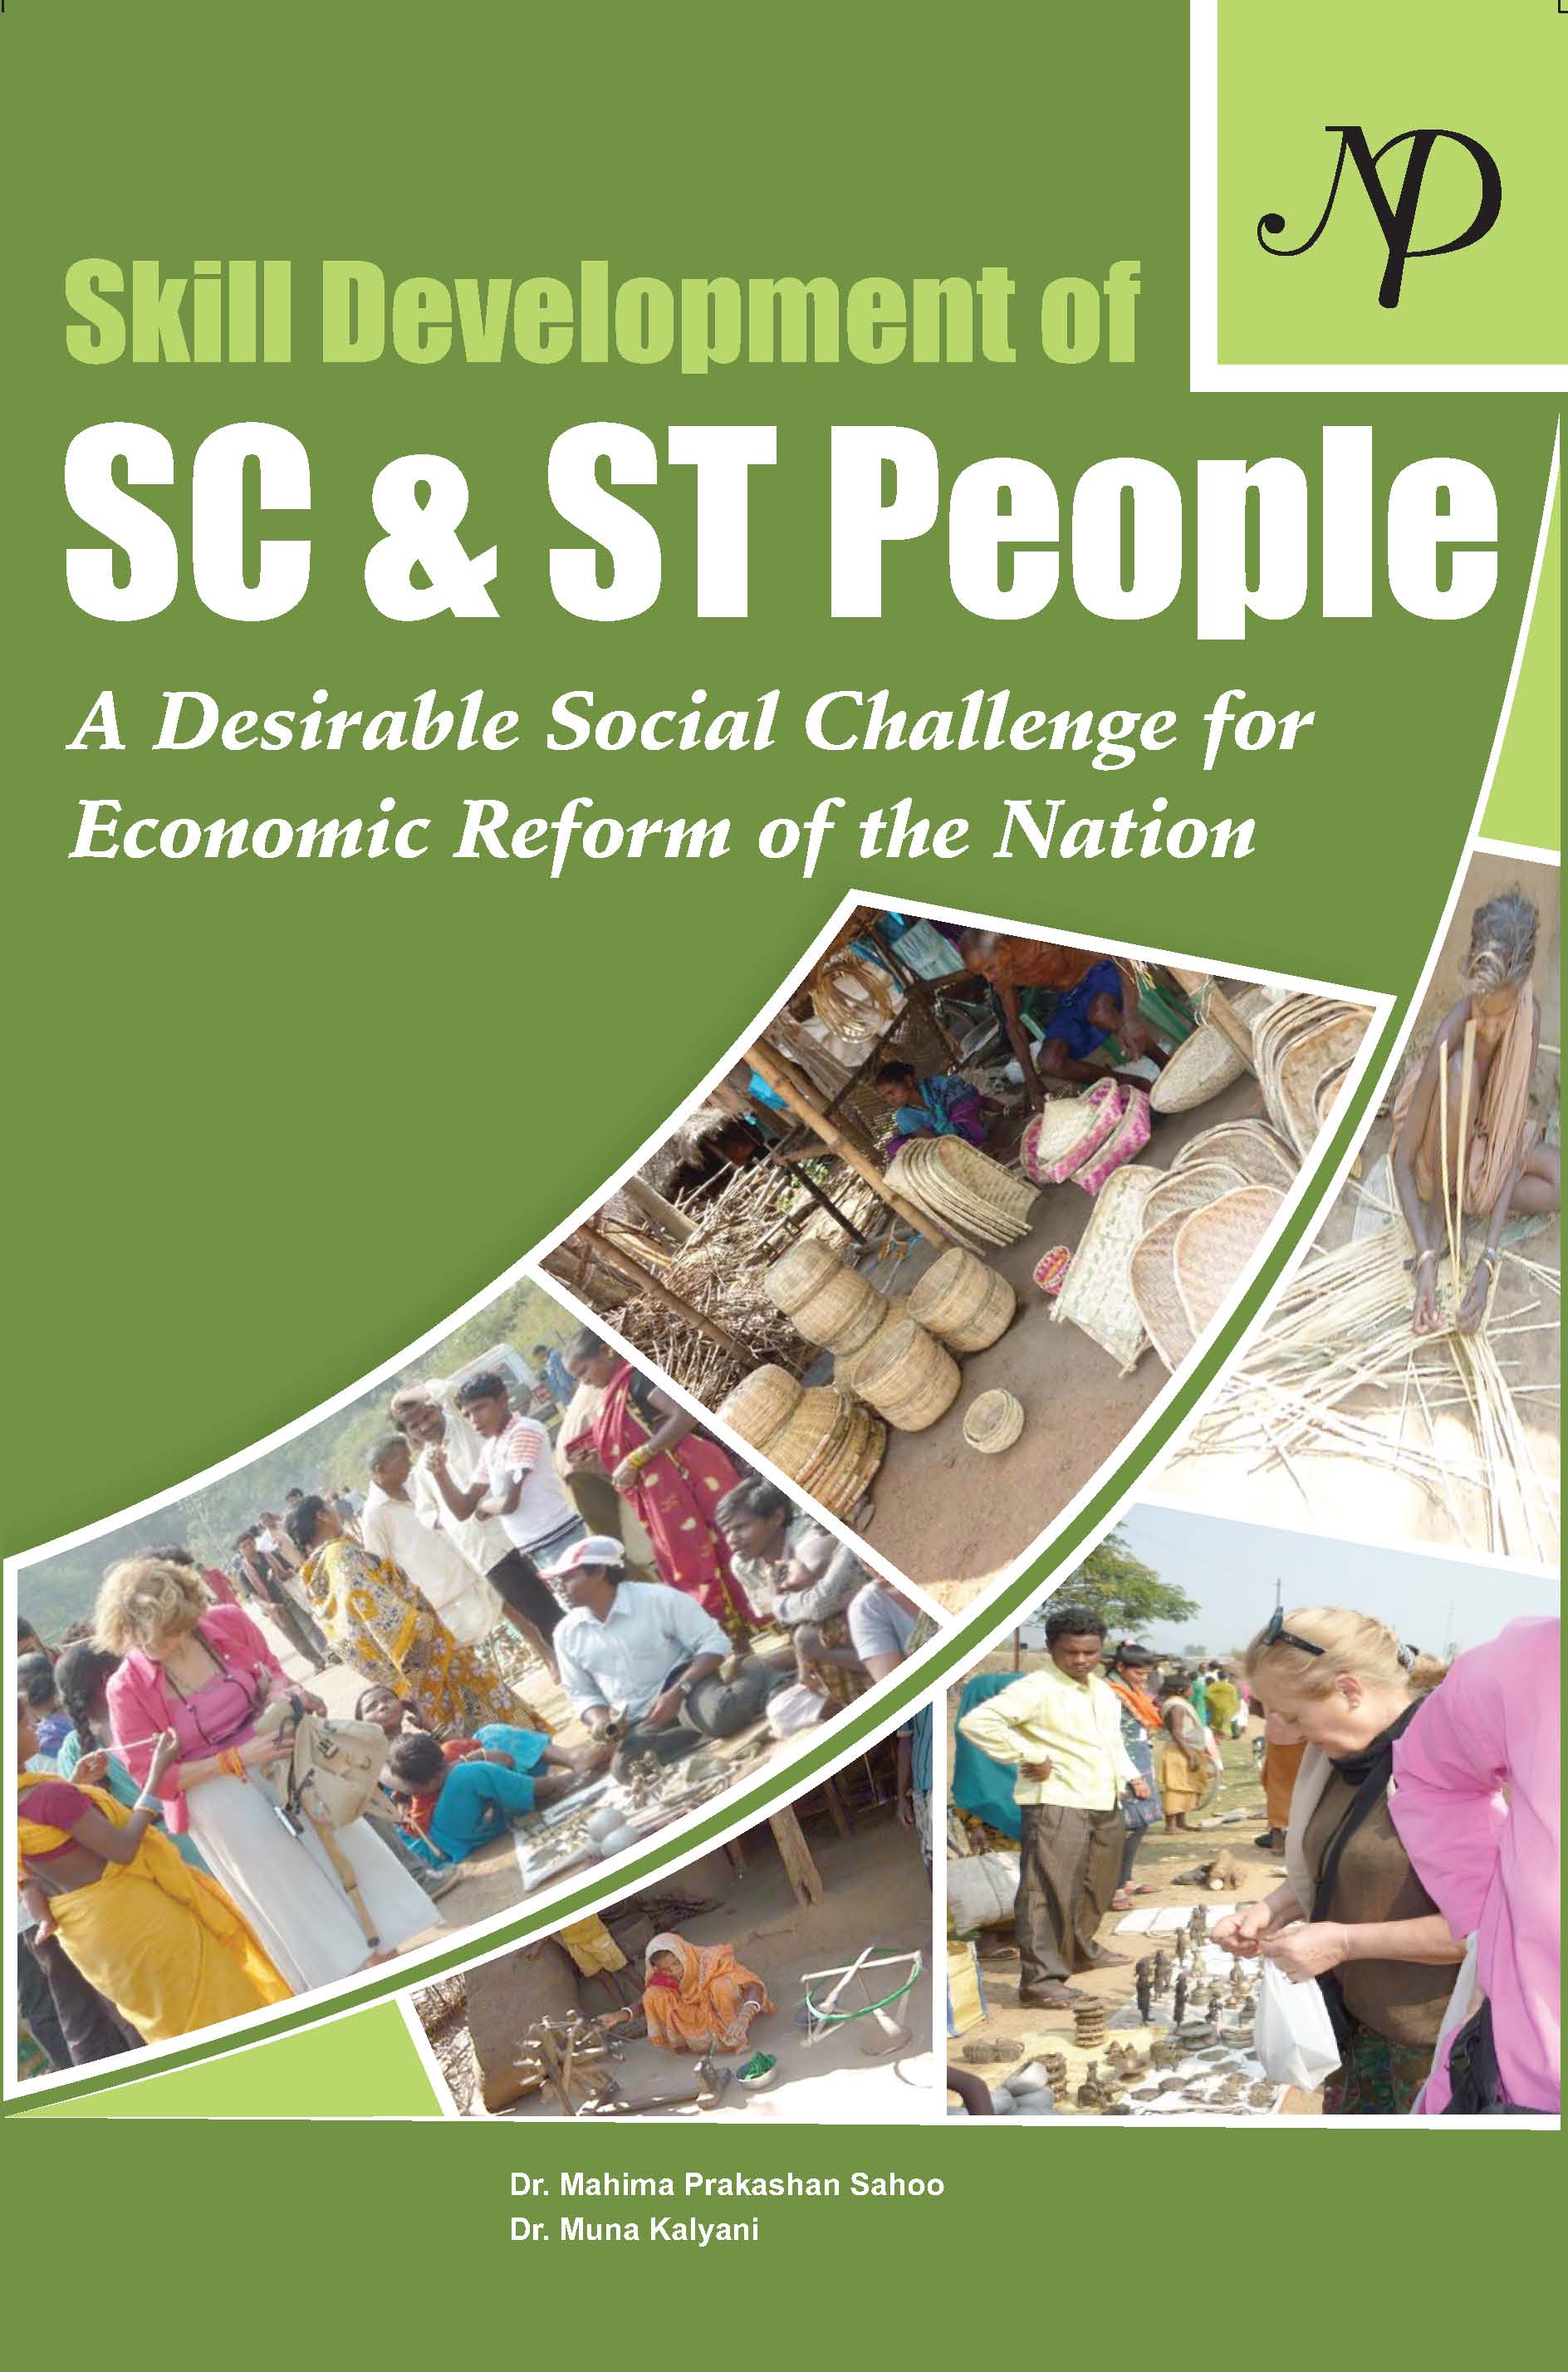 Skill Development of SC & ST People A Desirable Social Challenge for Economic Reform of the Nation.jpg